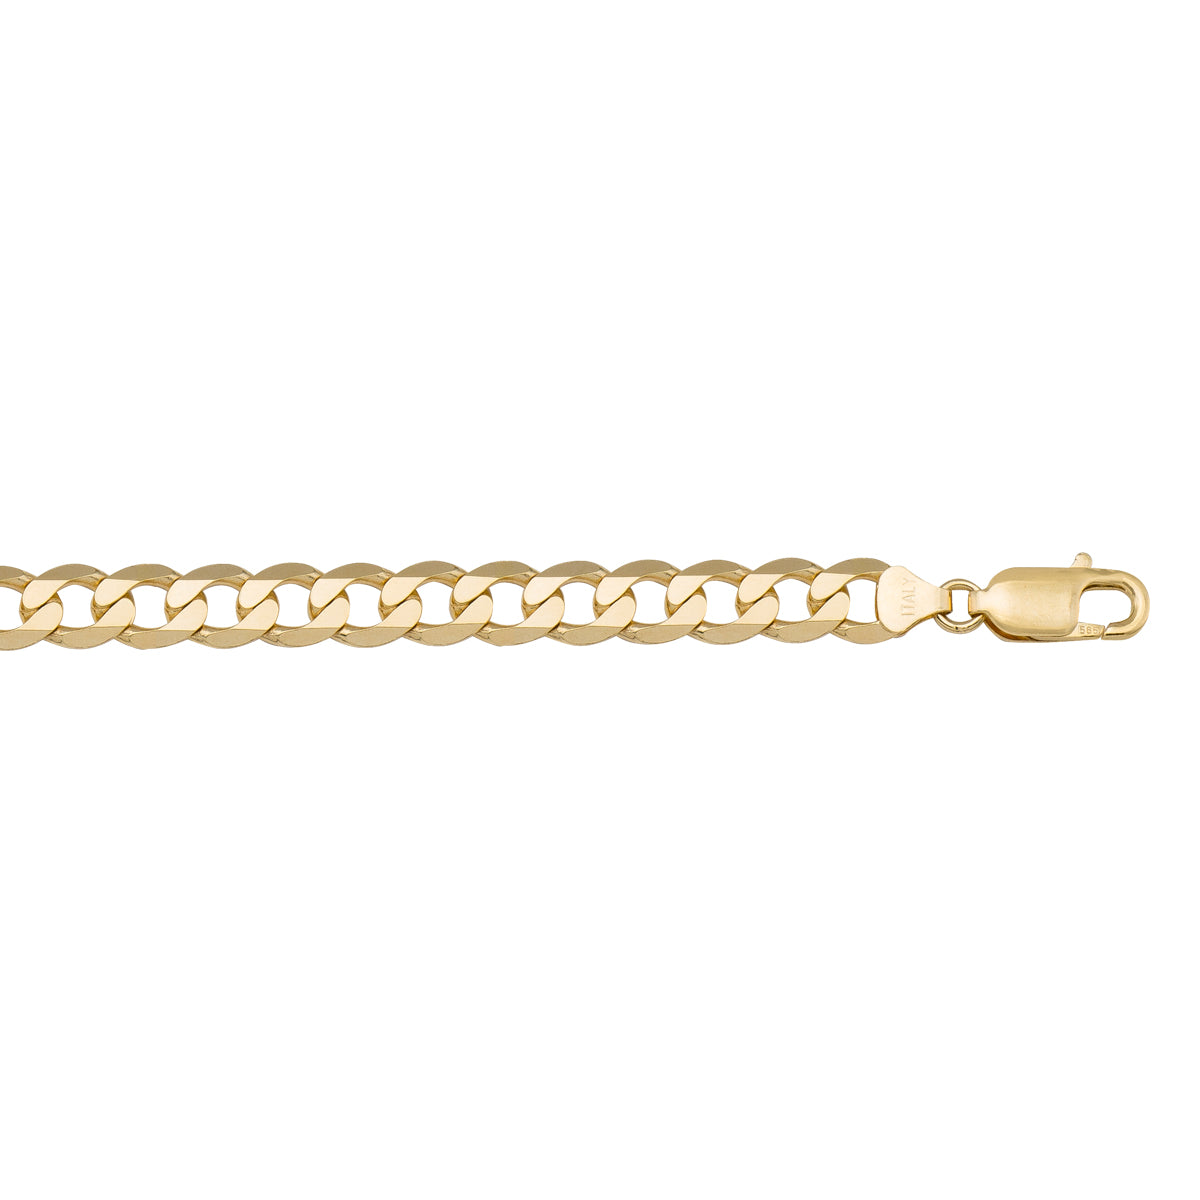 BRACELETS YELLOW GOLD SOLID OPEN LINK CHAIN